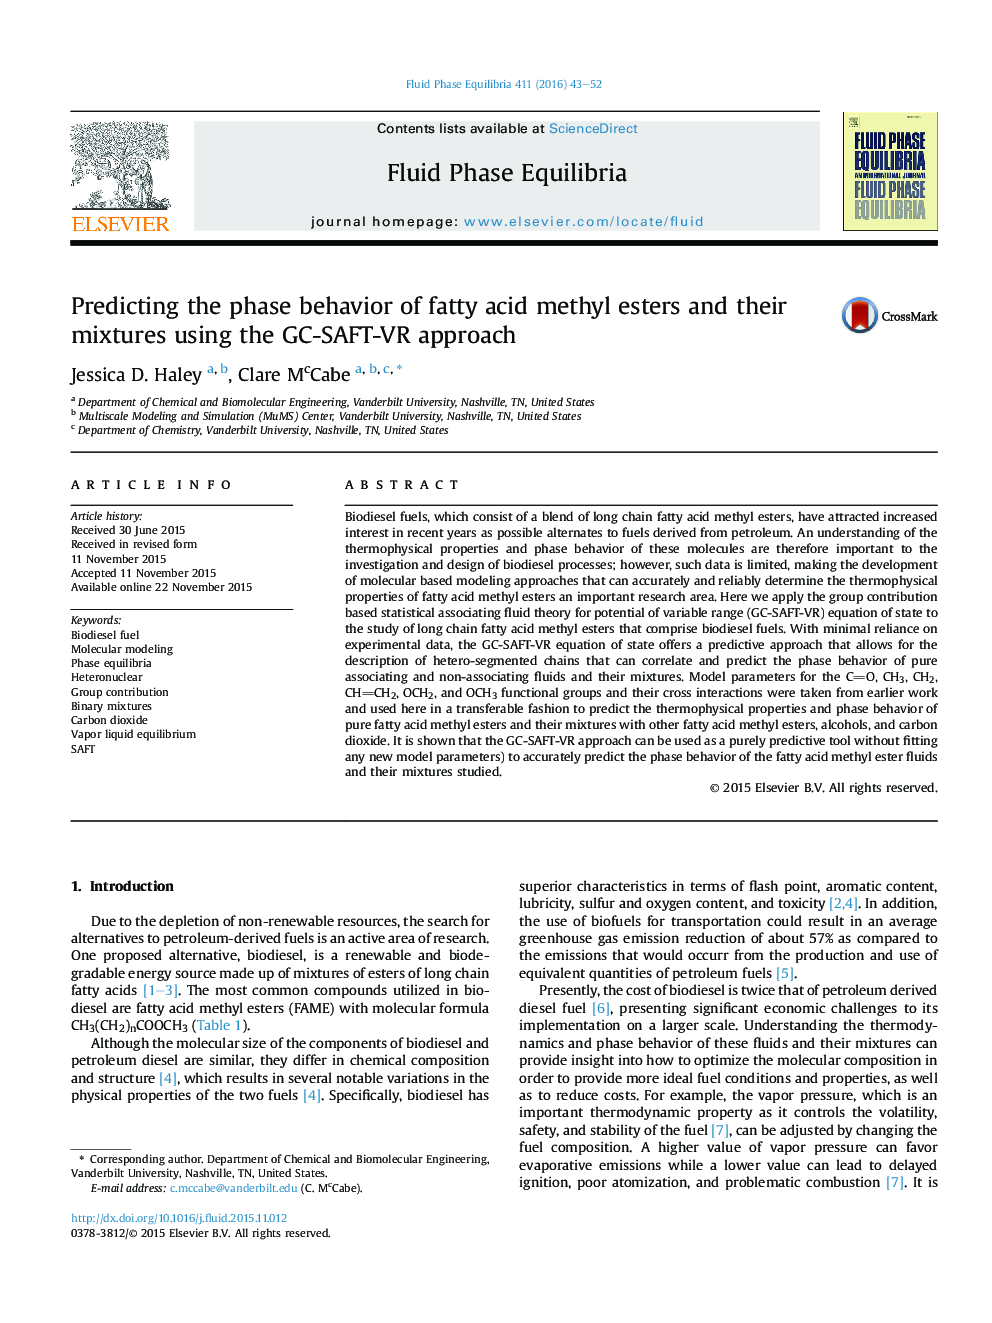 Predicting the phase behavior of fatty acid methyl esters and their mixtures using the GC-SAFT-VR approach